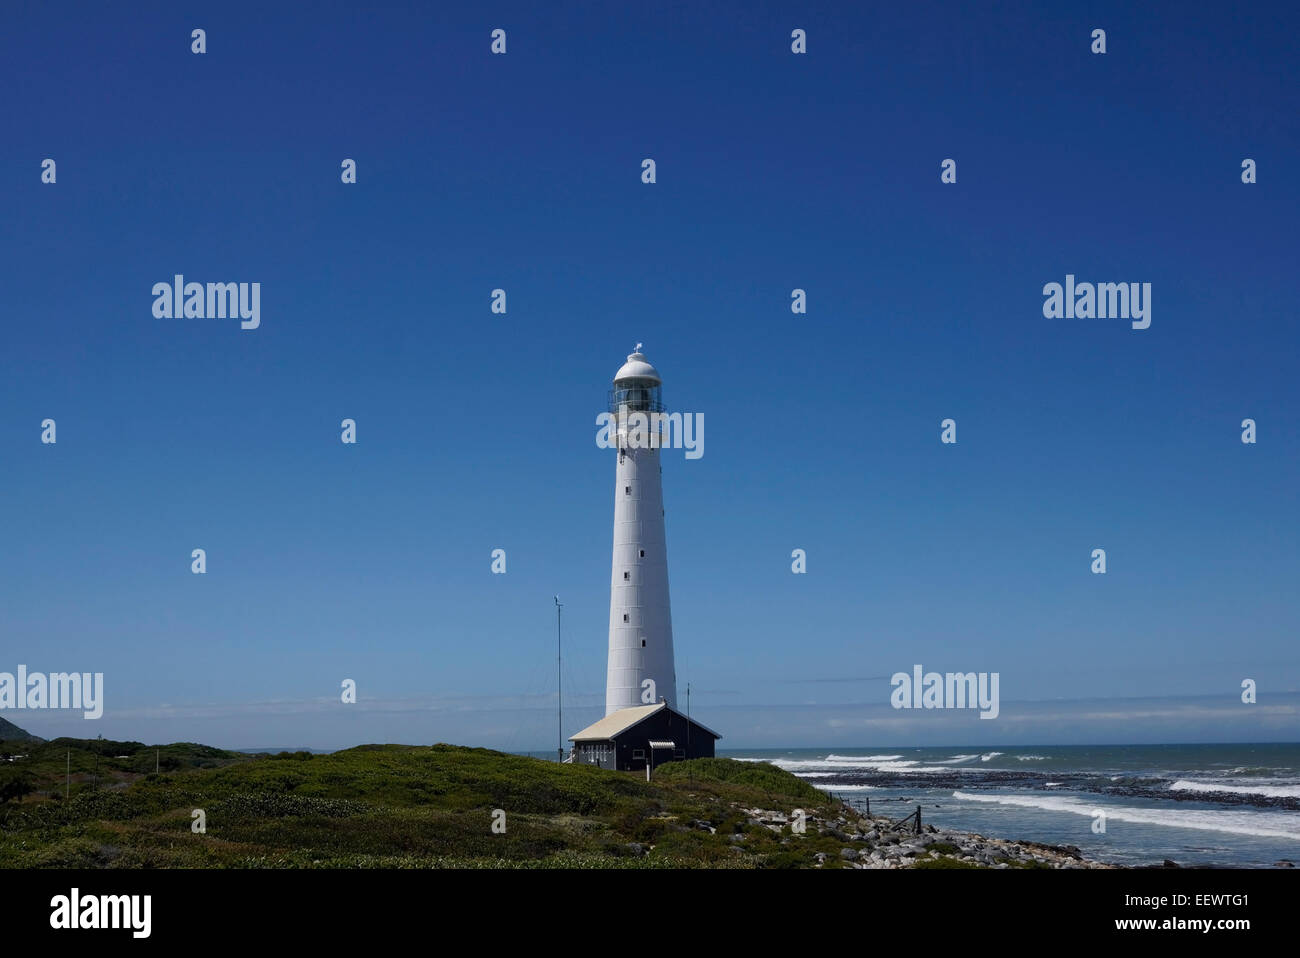 The Slangkop Point lighthouse in Kommetjie, near Cape Town. Stock Photo